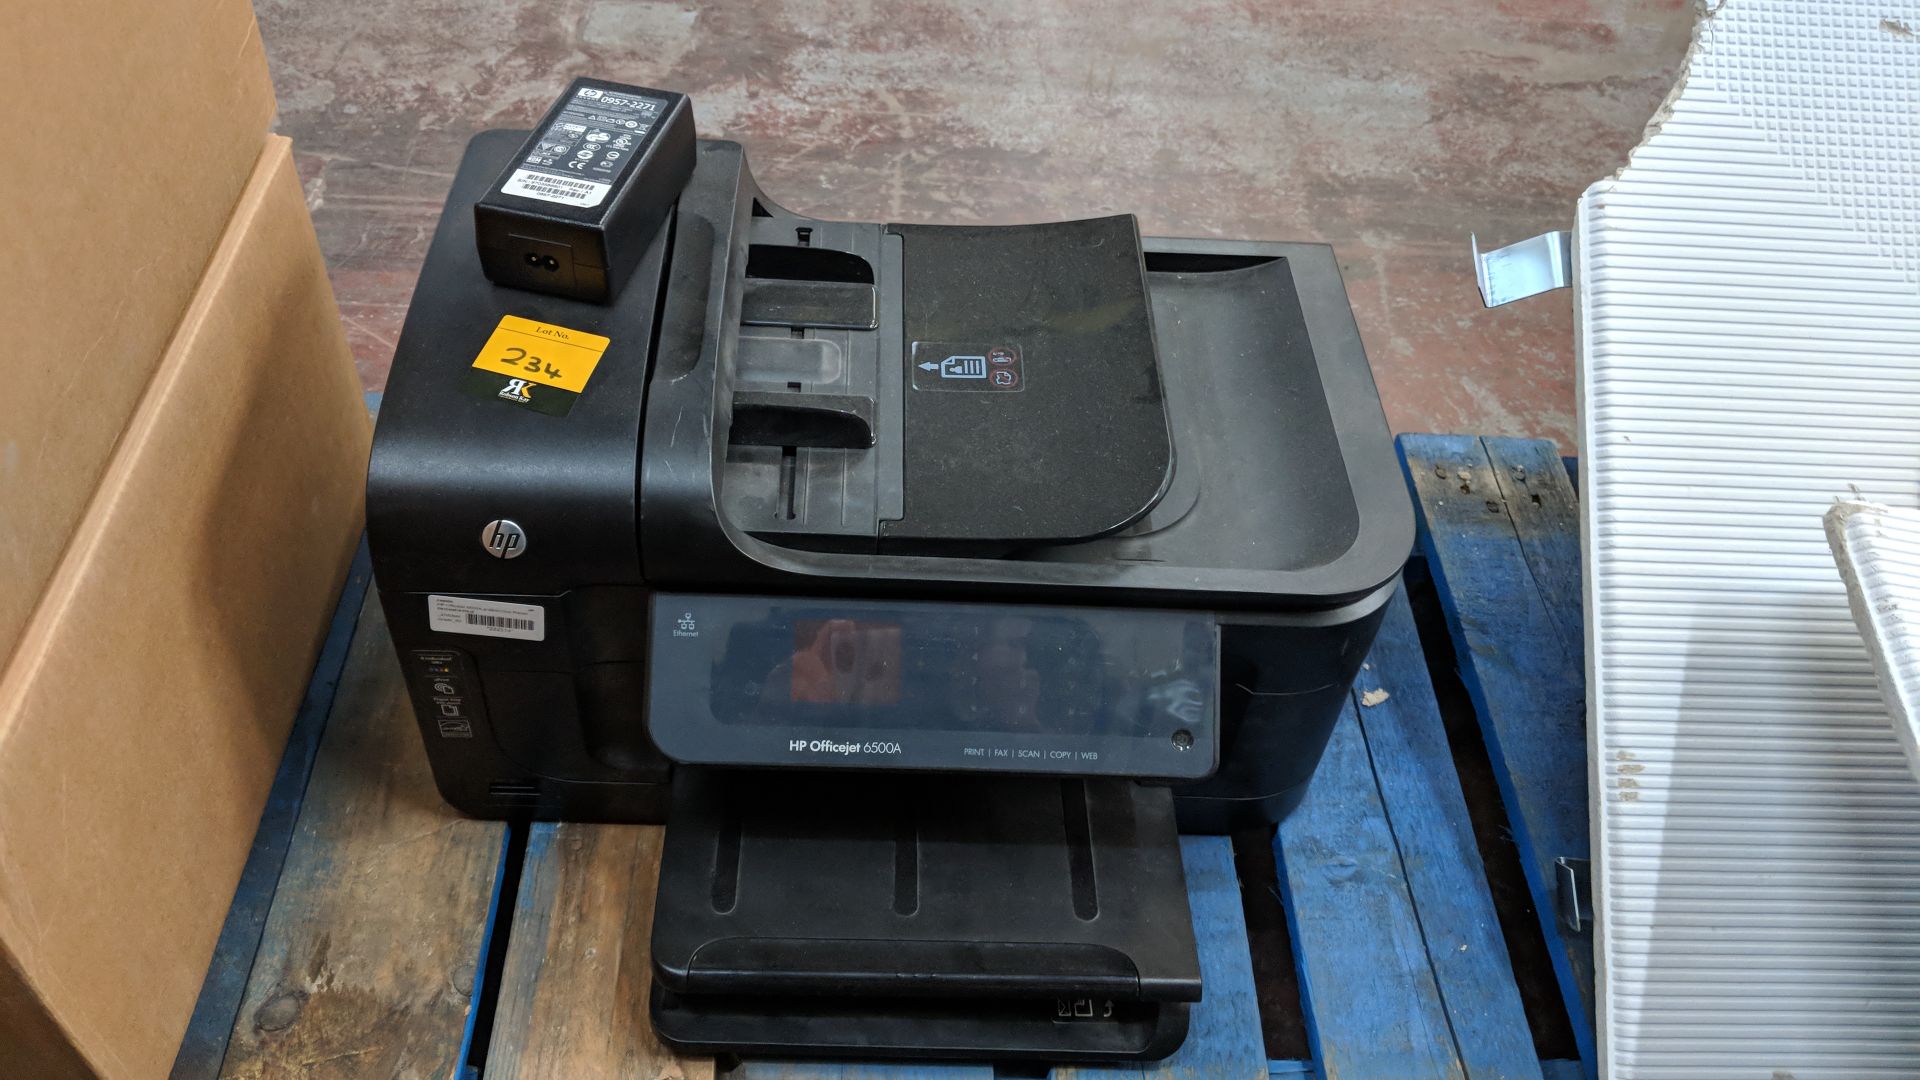 HP OfficeJet 6500A multifunction printer IMPORTANT: Please remember goods successfully bid upon must - Image 4 of 4